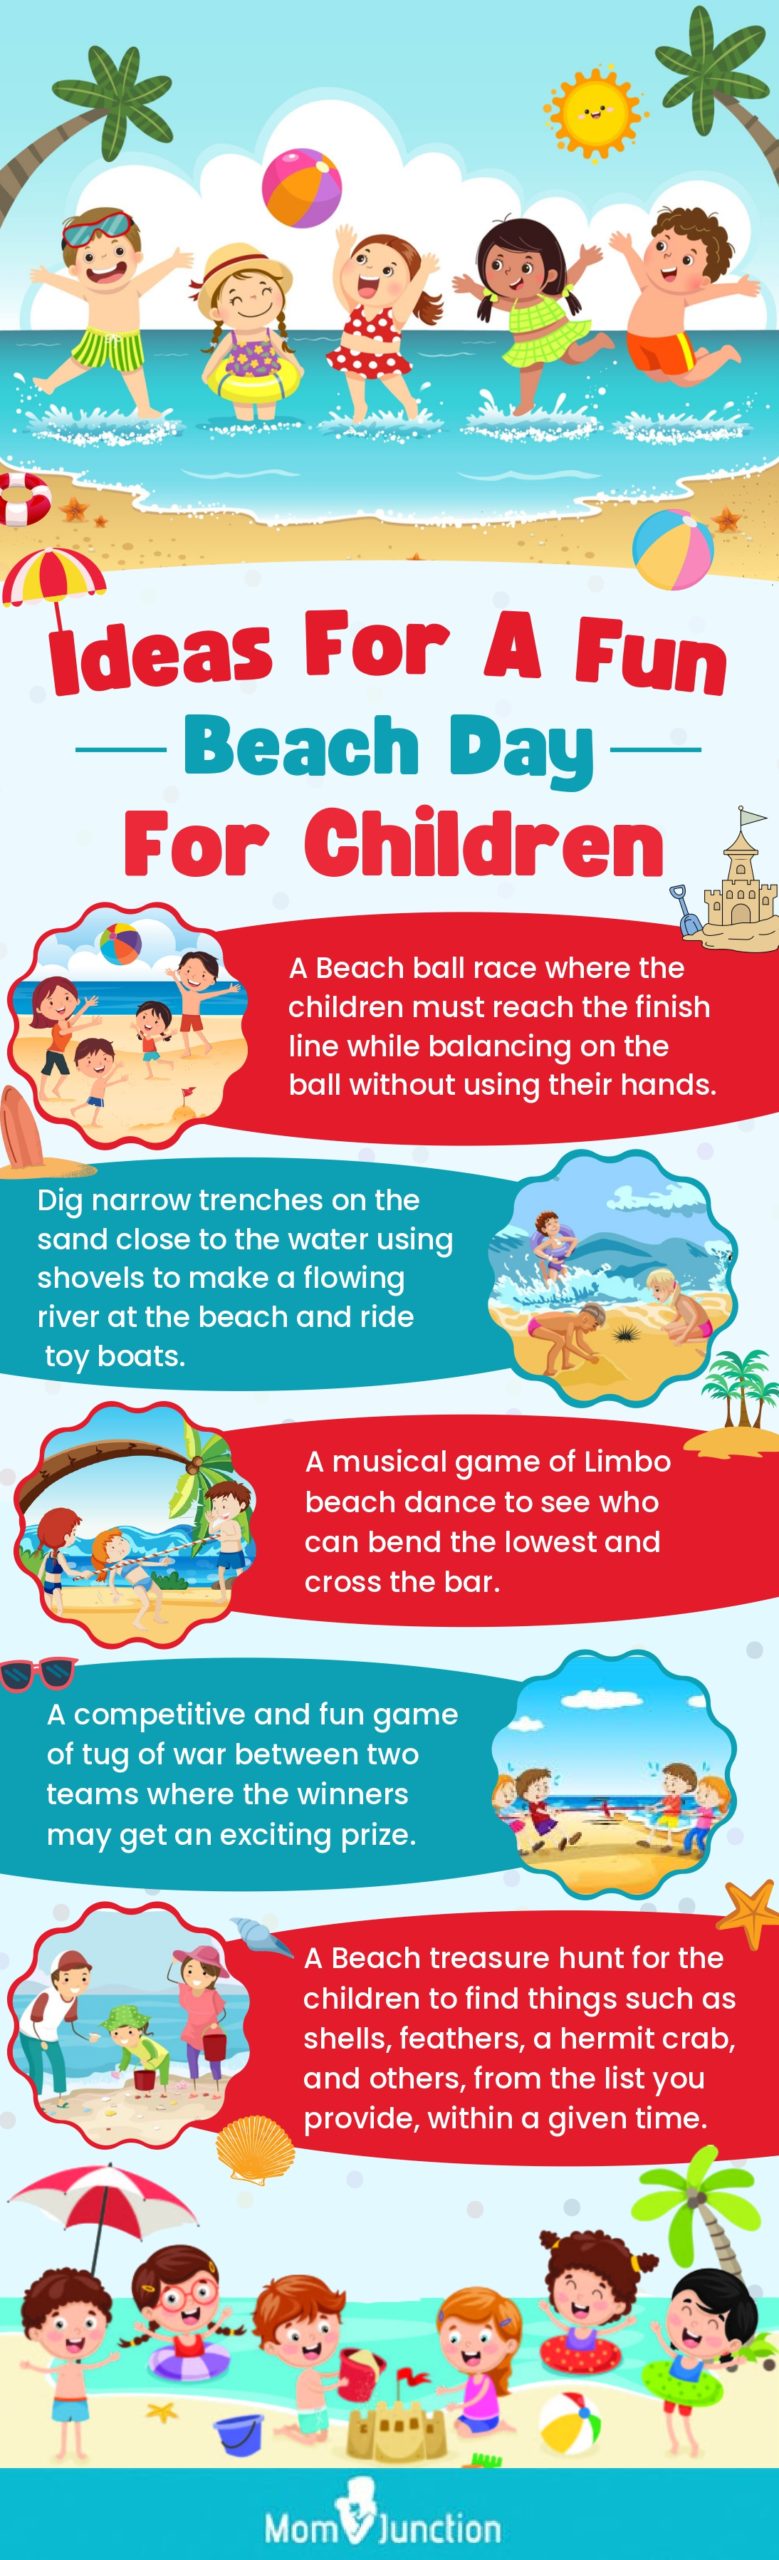 ideas for a fun beach day for children (infographic)